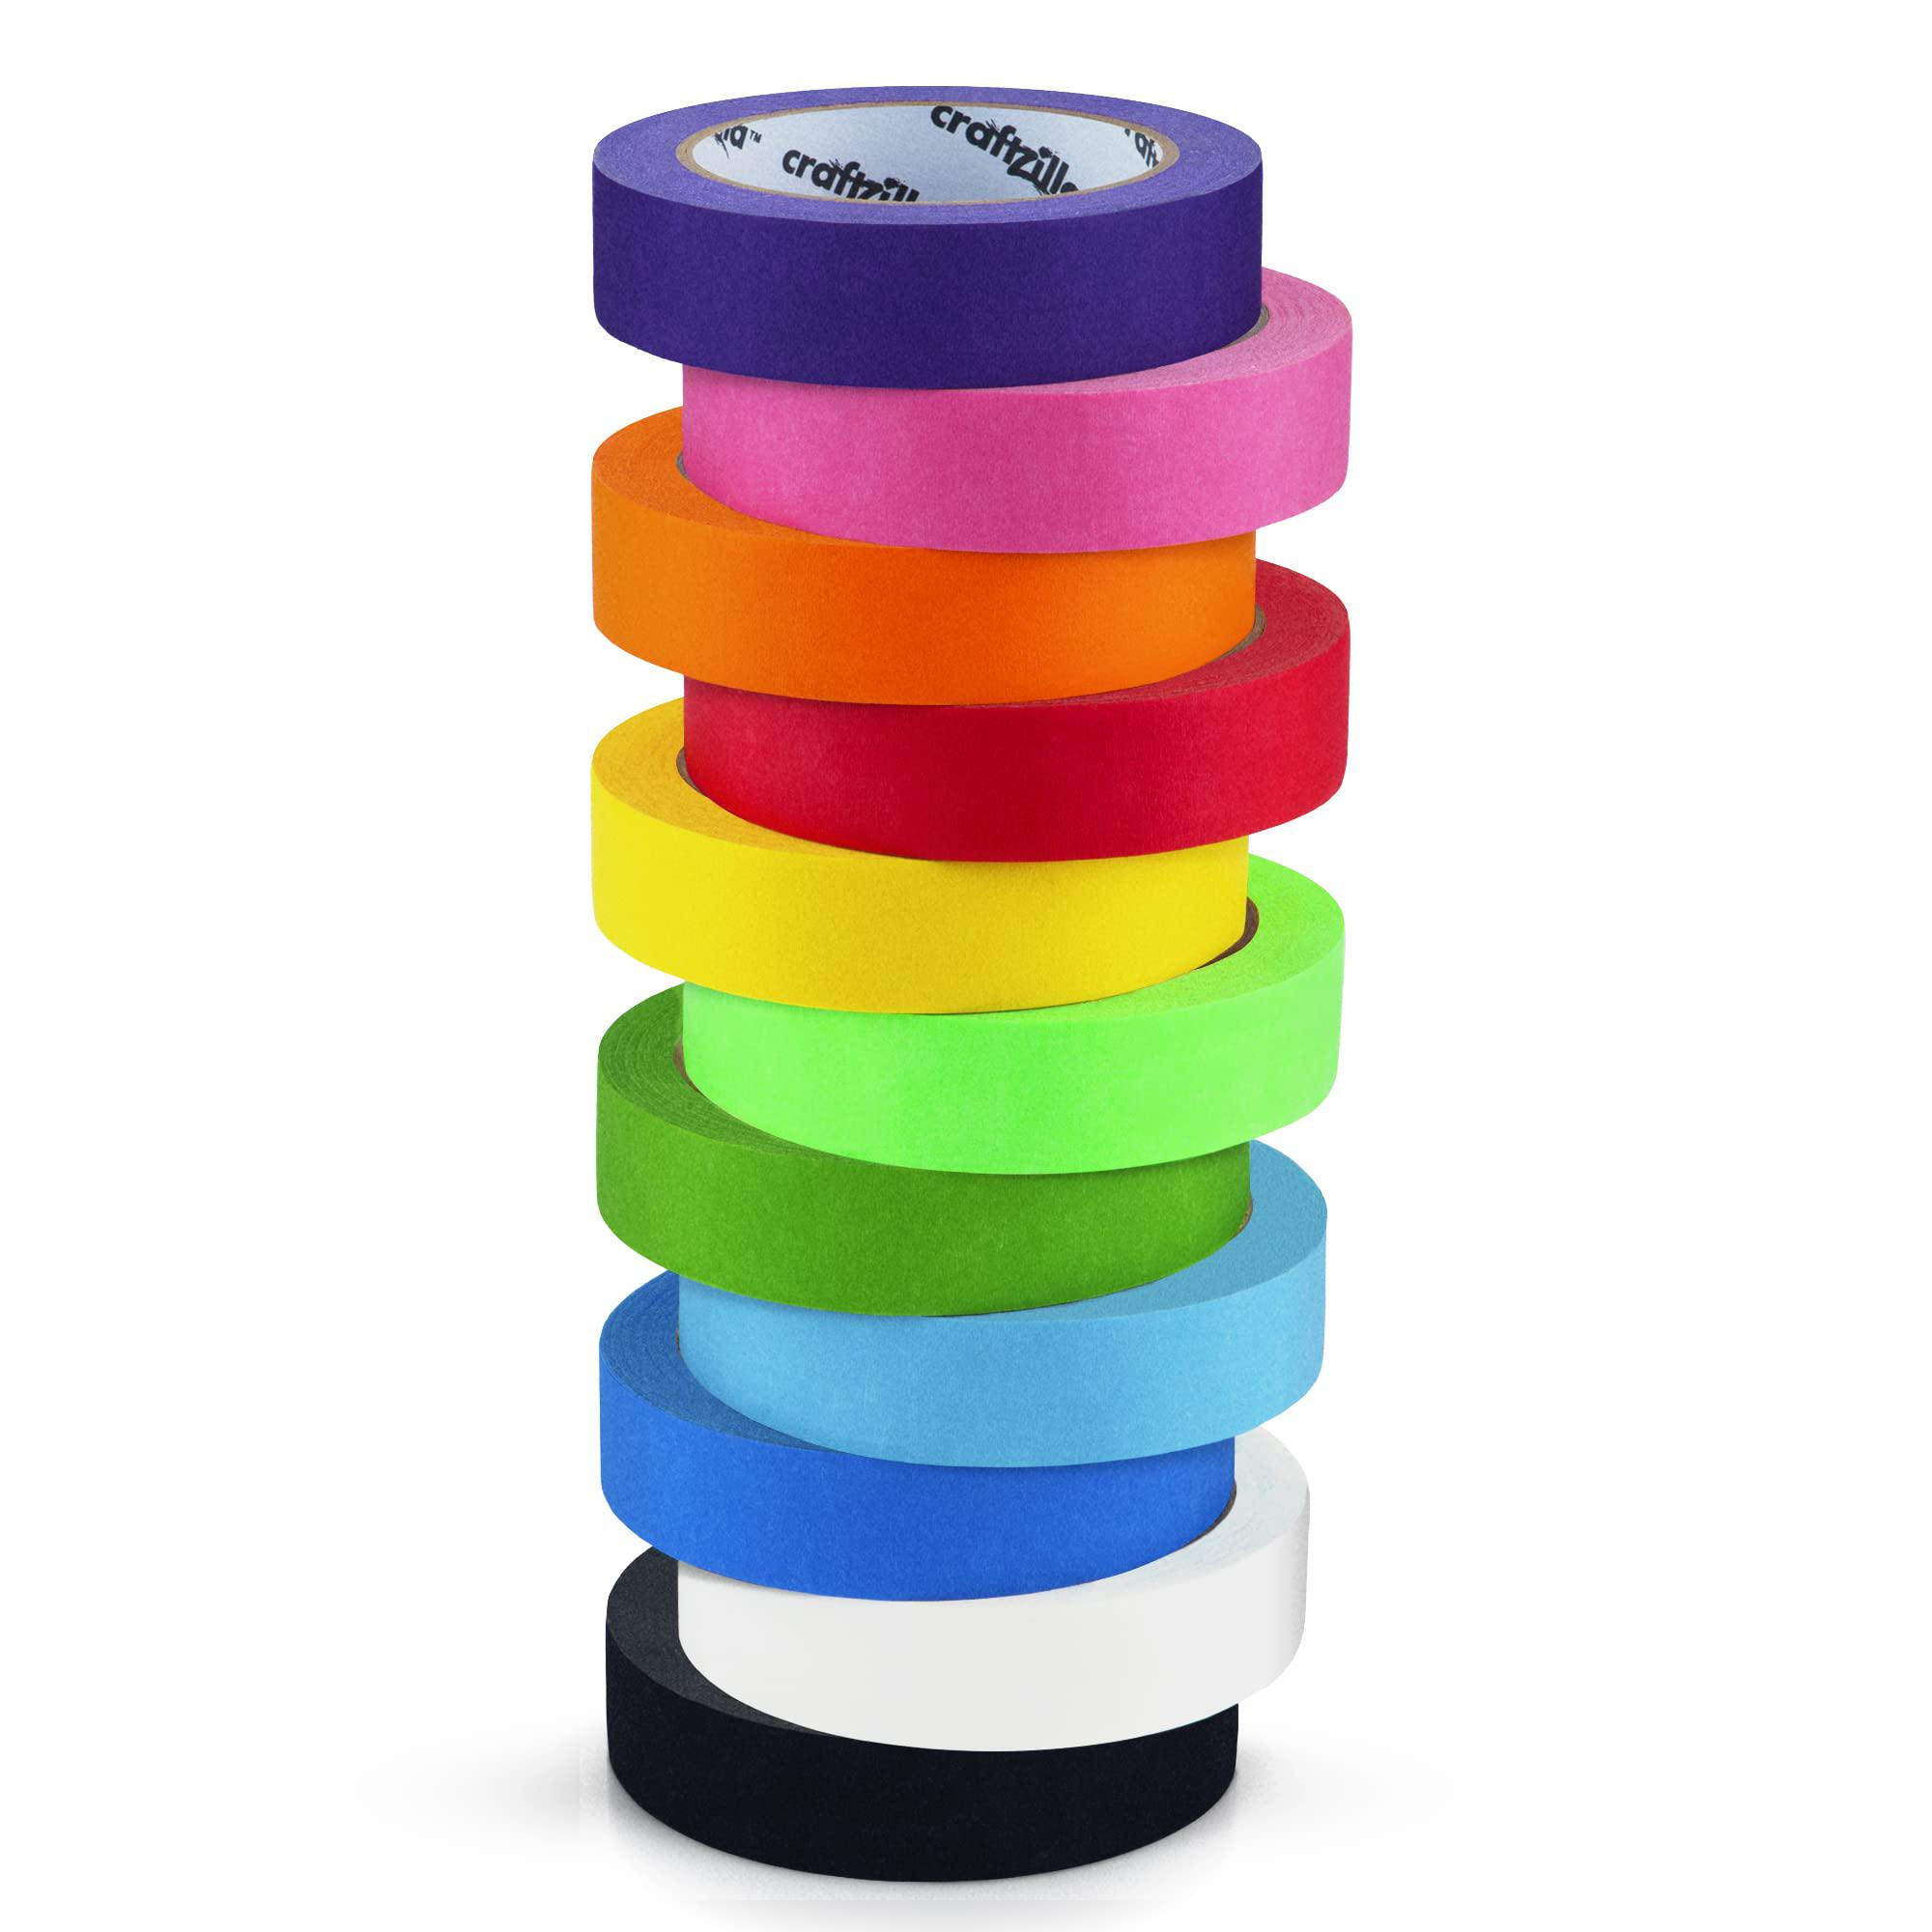 craftzilla colored masking tape - 11 roll multi pack - 825 feet x 1 inch of colorful craft tape - vibrant rainbow colored pai